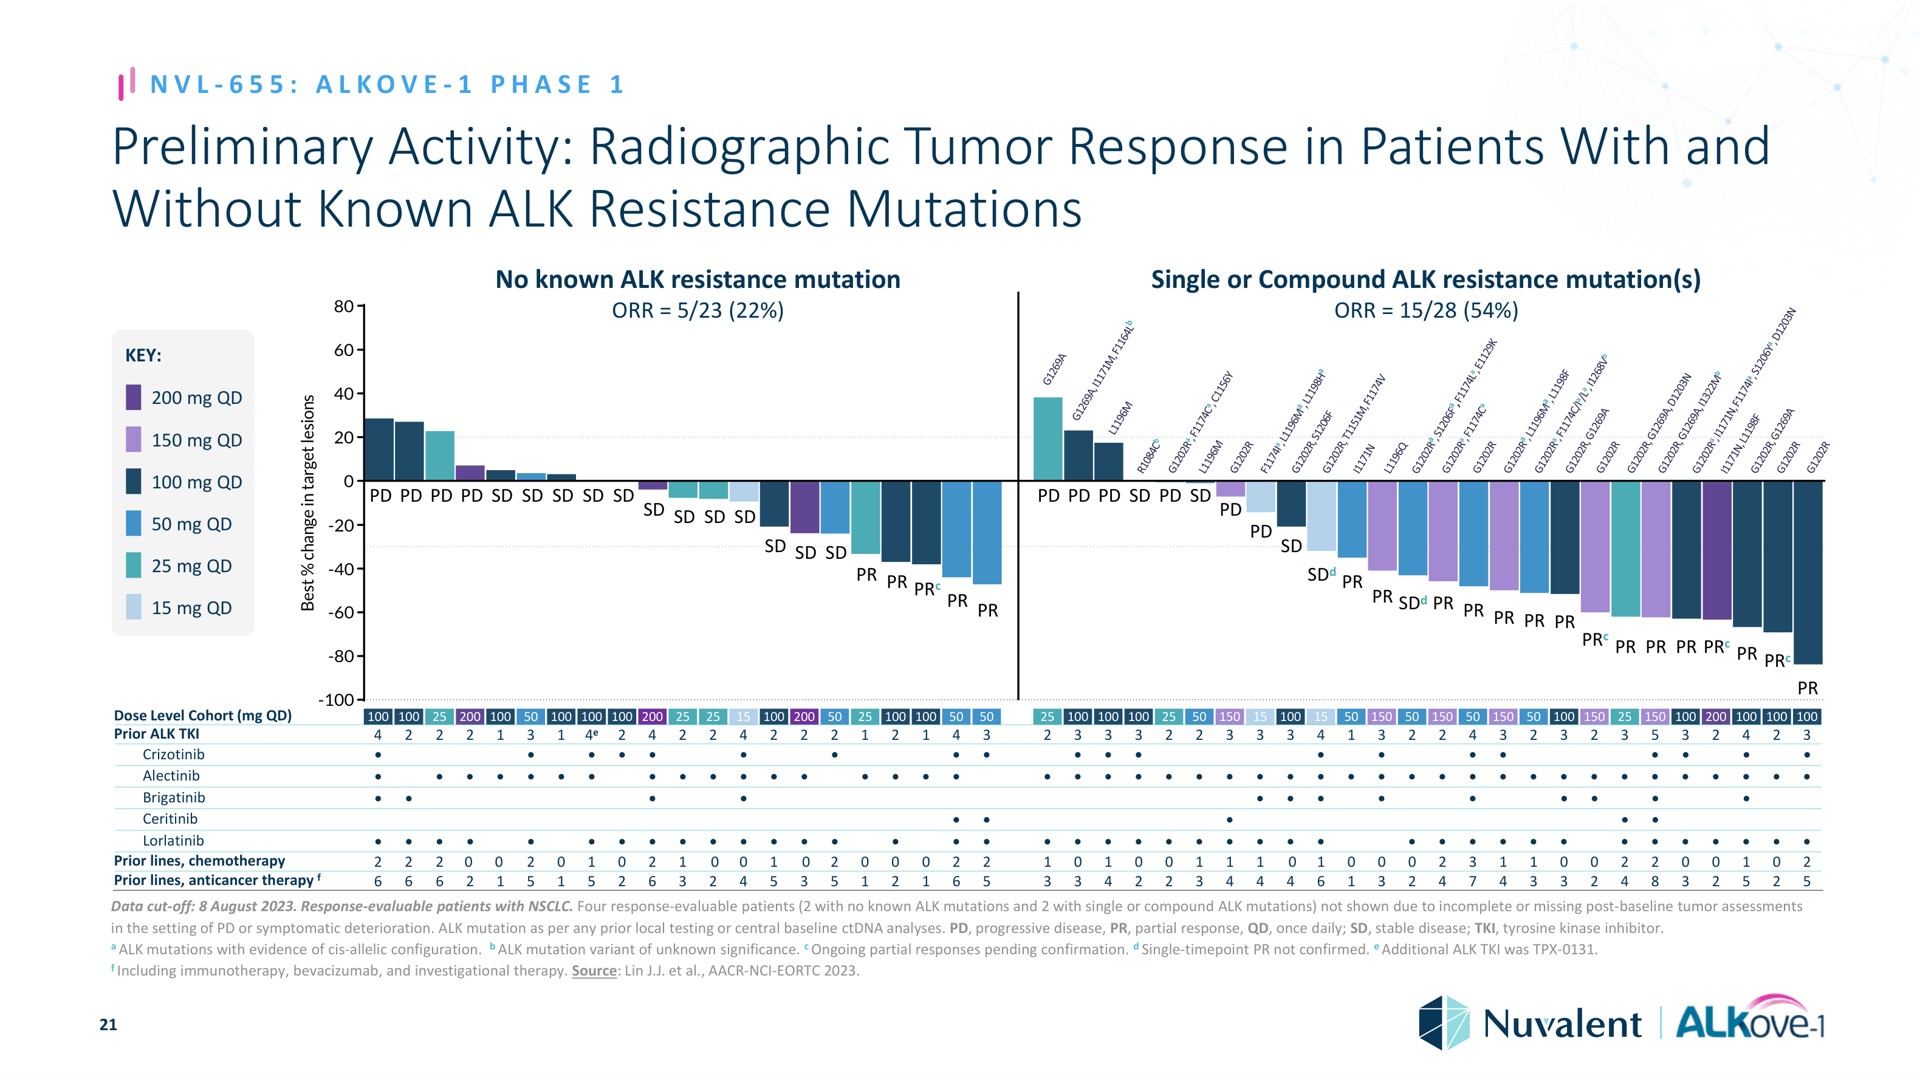 preliminary activity radiographic tumor response in patients with and without known alk resistance mutations phase key a a dose level cohort prior no mutation single or compound mutation a a holla a prior lines chemotherapy prior lines anticancer therapy data cut off august response evaluable four response evaluable no single or compound not shown due to incomplete or missing post assessments the setting of or symptomatic deterioration mutation as per any prior local testing or central analyses progressive disease partial once daily stable disease tyrosine kinase inhibitor evidence of allelic configuration mutation variant of unknown significance ongoing partial responses pending confirmation single not confirmed additional was including investigational therapy source lin | Nuvalent